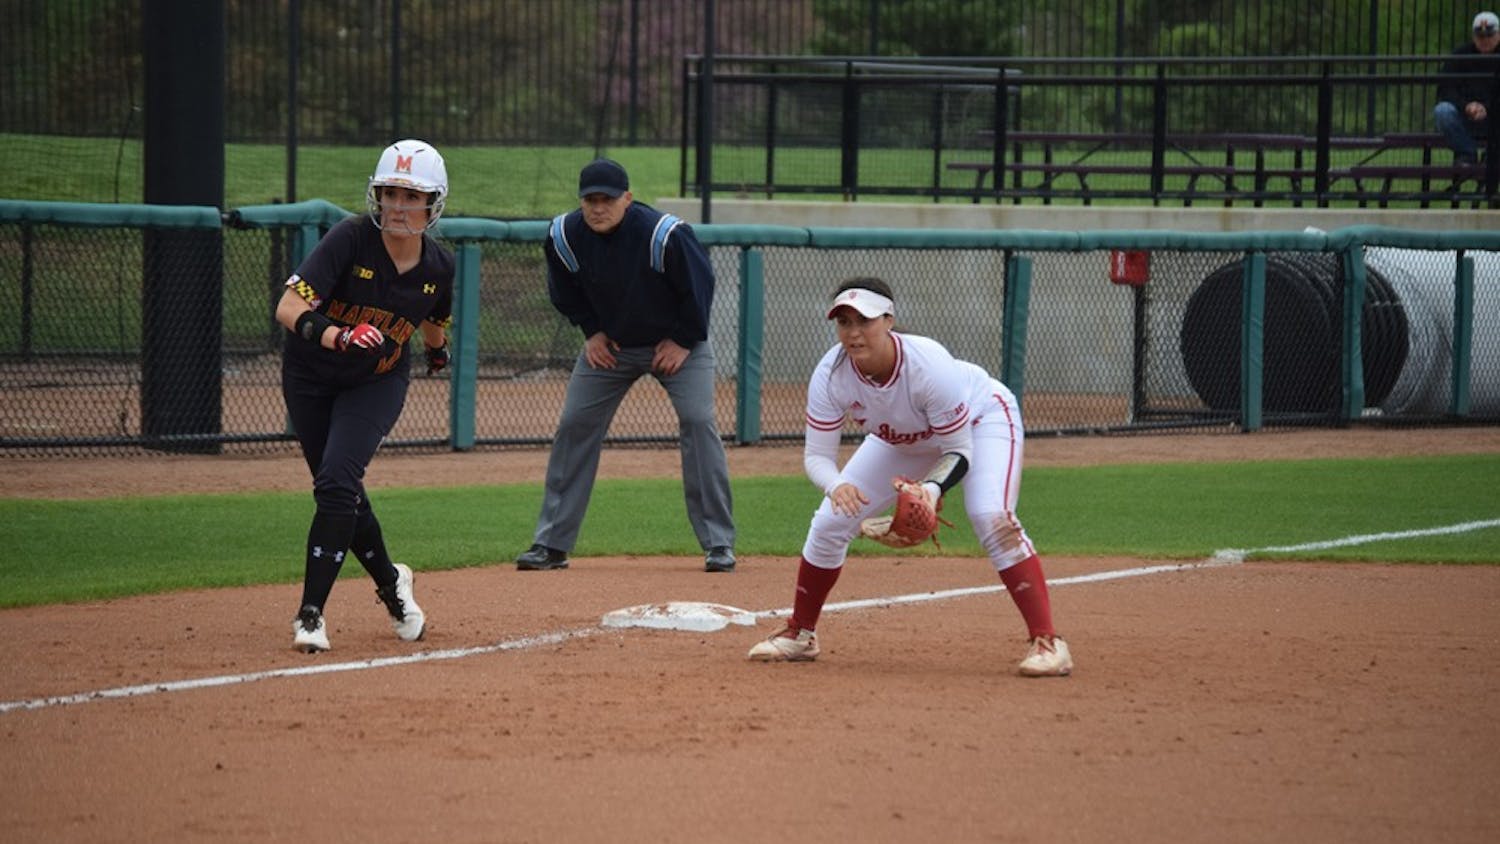 Freshman utility player&nbsp;Katie Lacefield covers the left side of the infield while a Maryland player takes a lead off third base.&nbsp;The Hoosiers defeated the Terrapins in all three games in Bloomington.